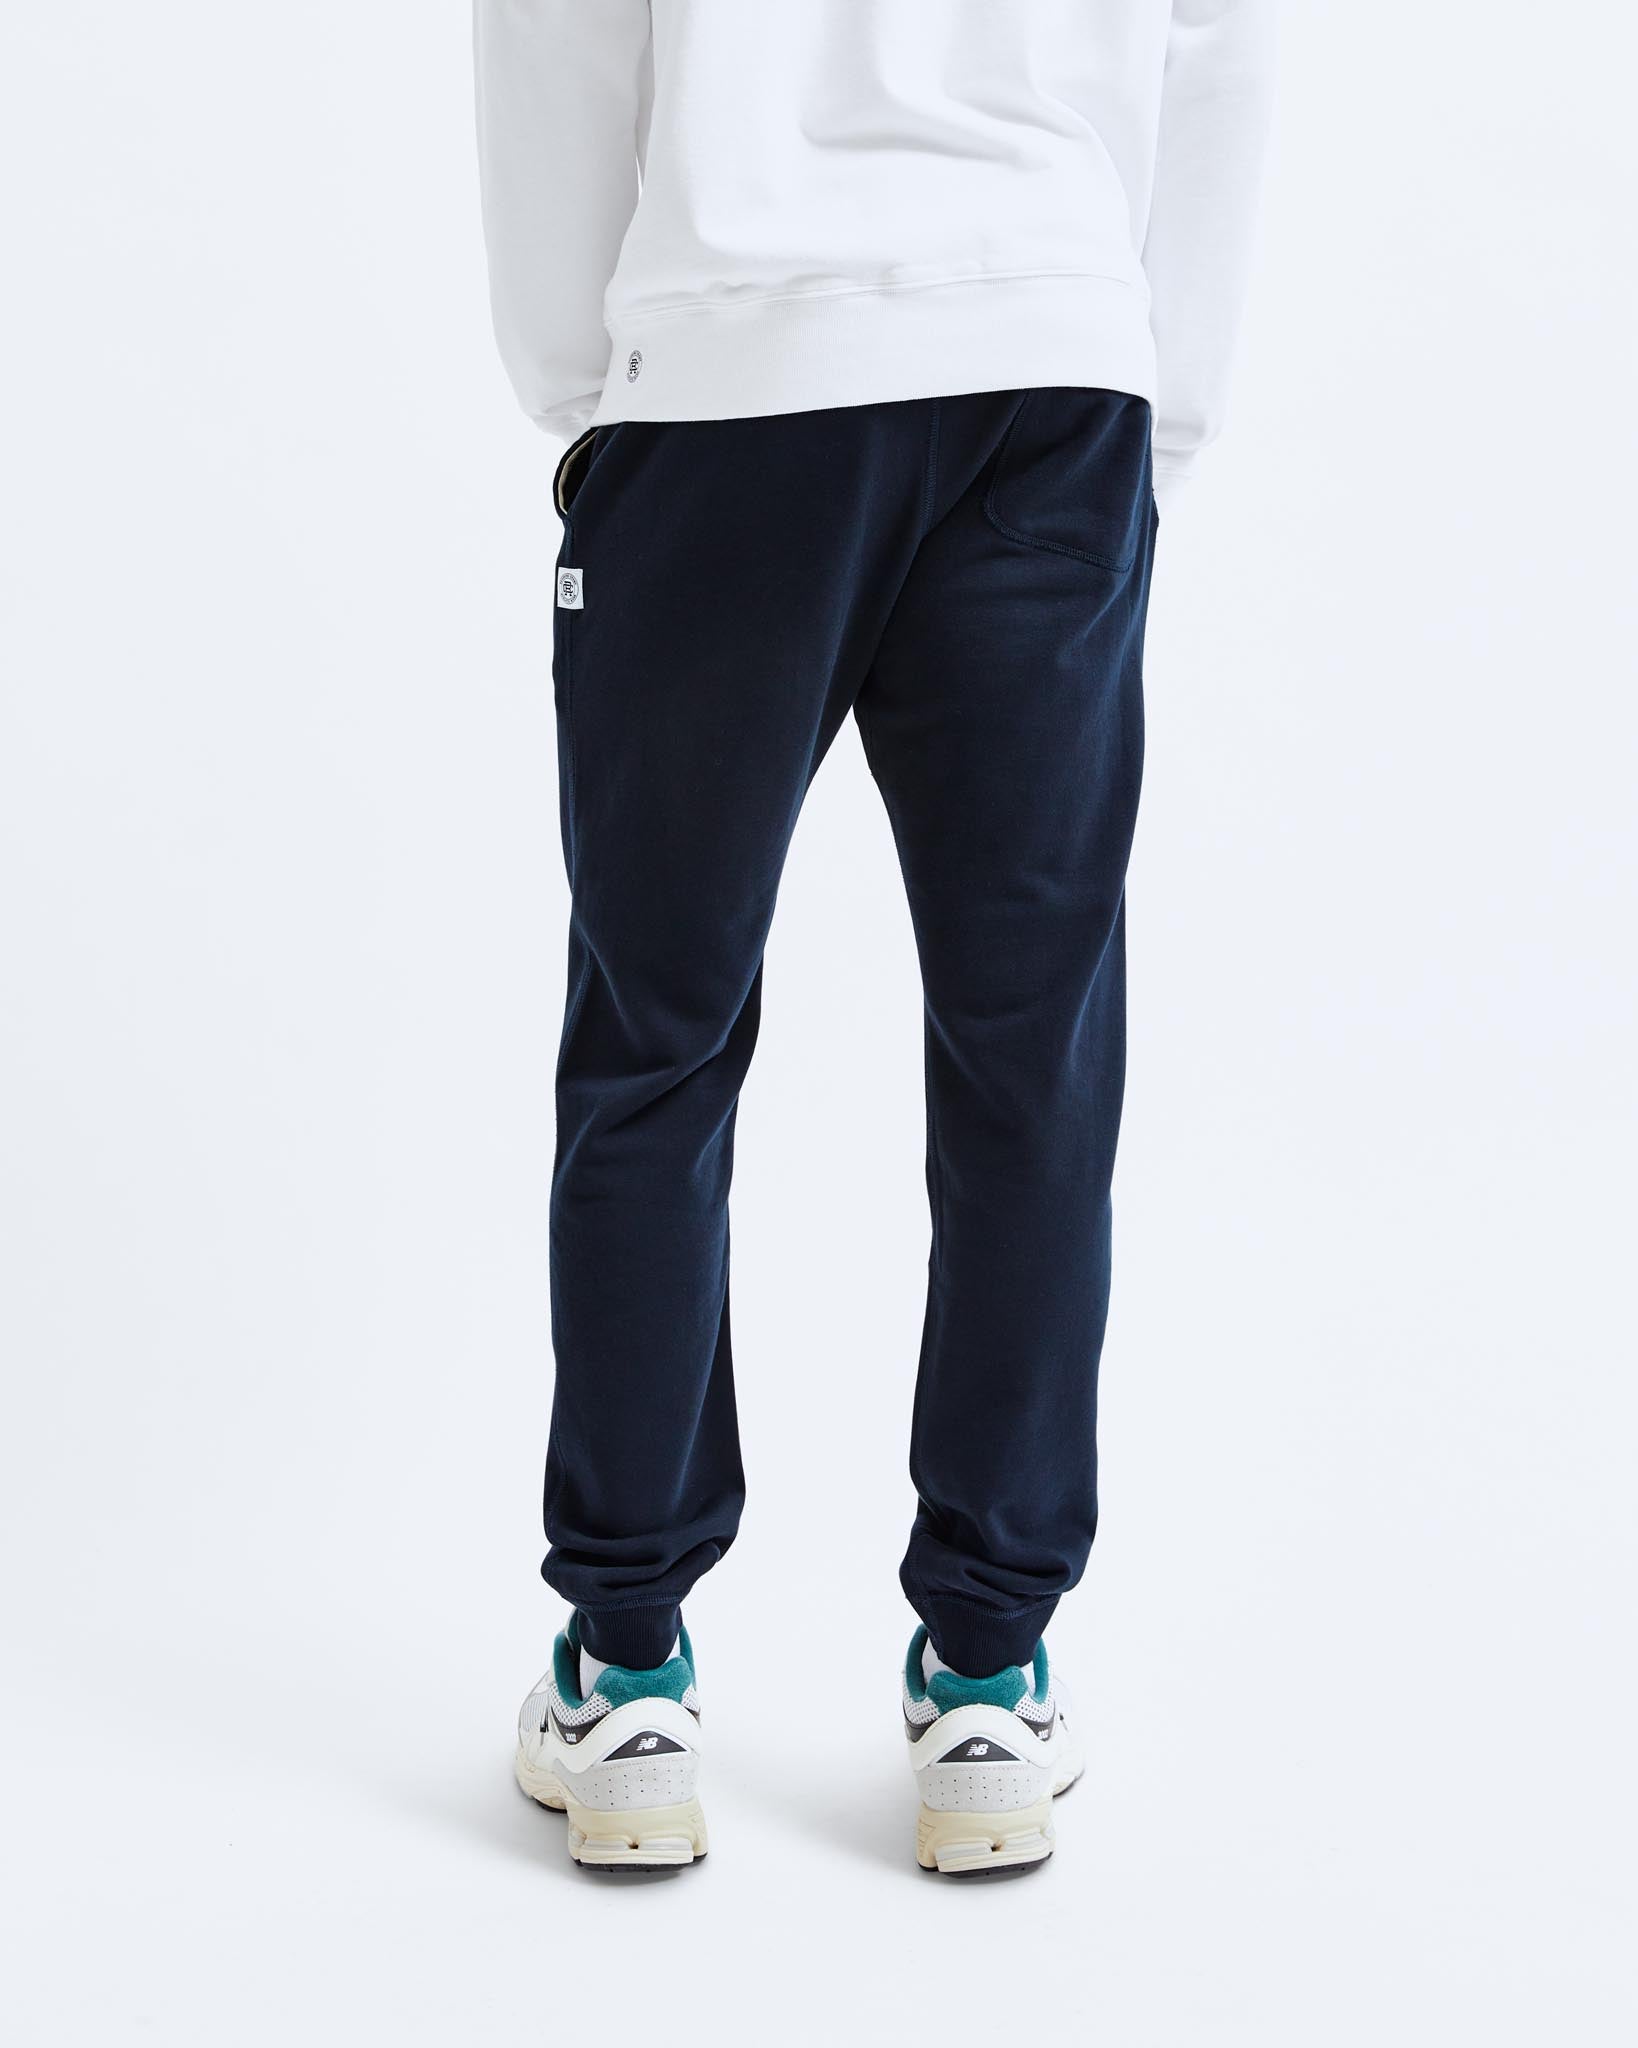 REIGNING CHAMP Slim-Fit Loopback Cotton-Jersey Sweatpants for Men